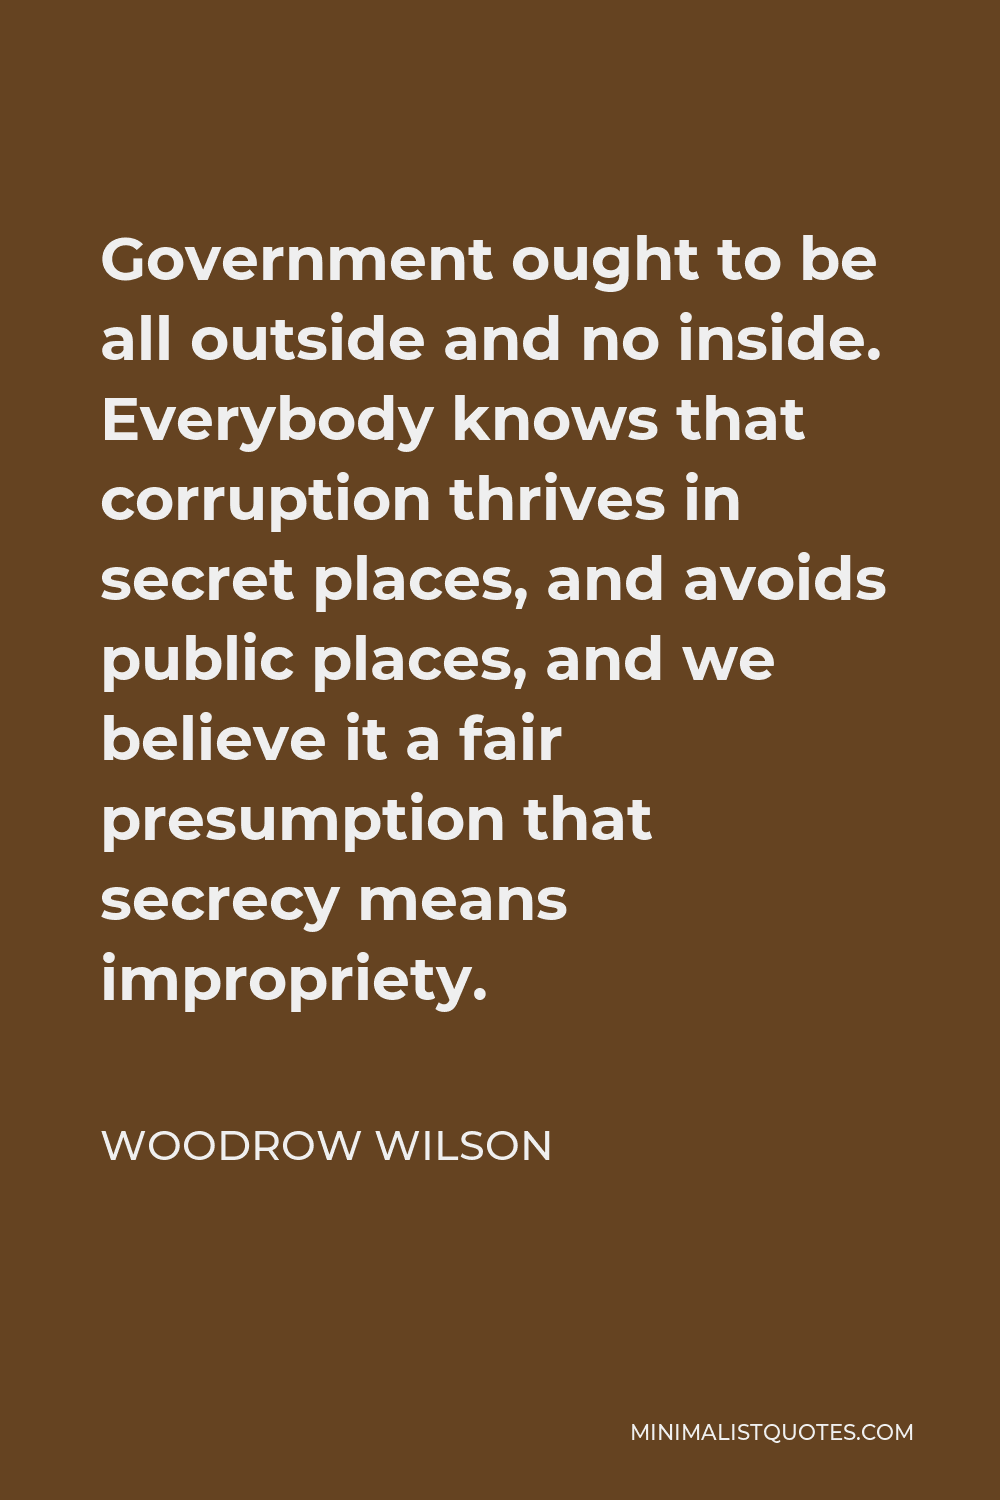 Woodrow Wilson Quote - Government ought to be all outside and no inside. Everybody knows that corruption thrives in secret places, and avoids public places, and we believe it a fair presumption that secrecy means impropriety.